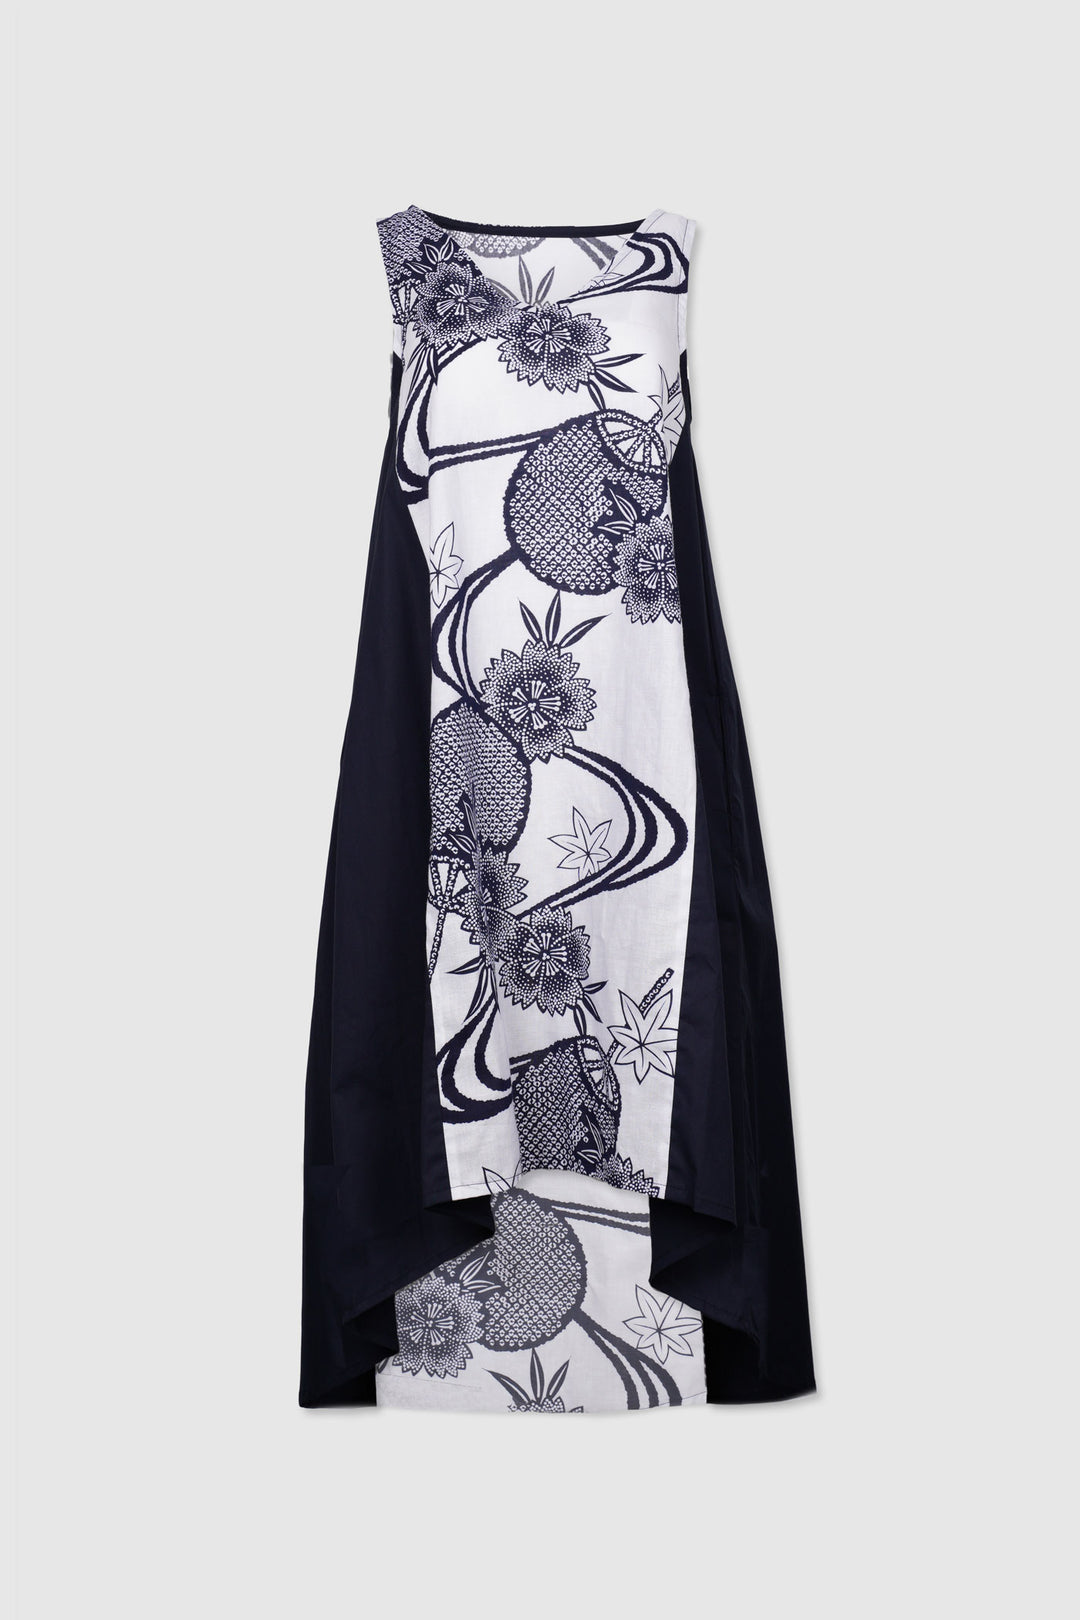 Sleeveless A-Line Cotton Dress with Floral Panels | Aimi